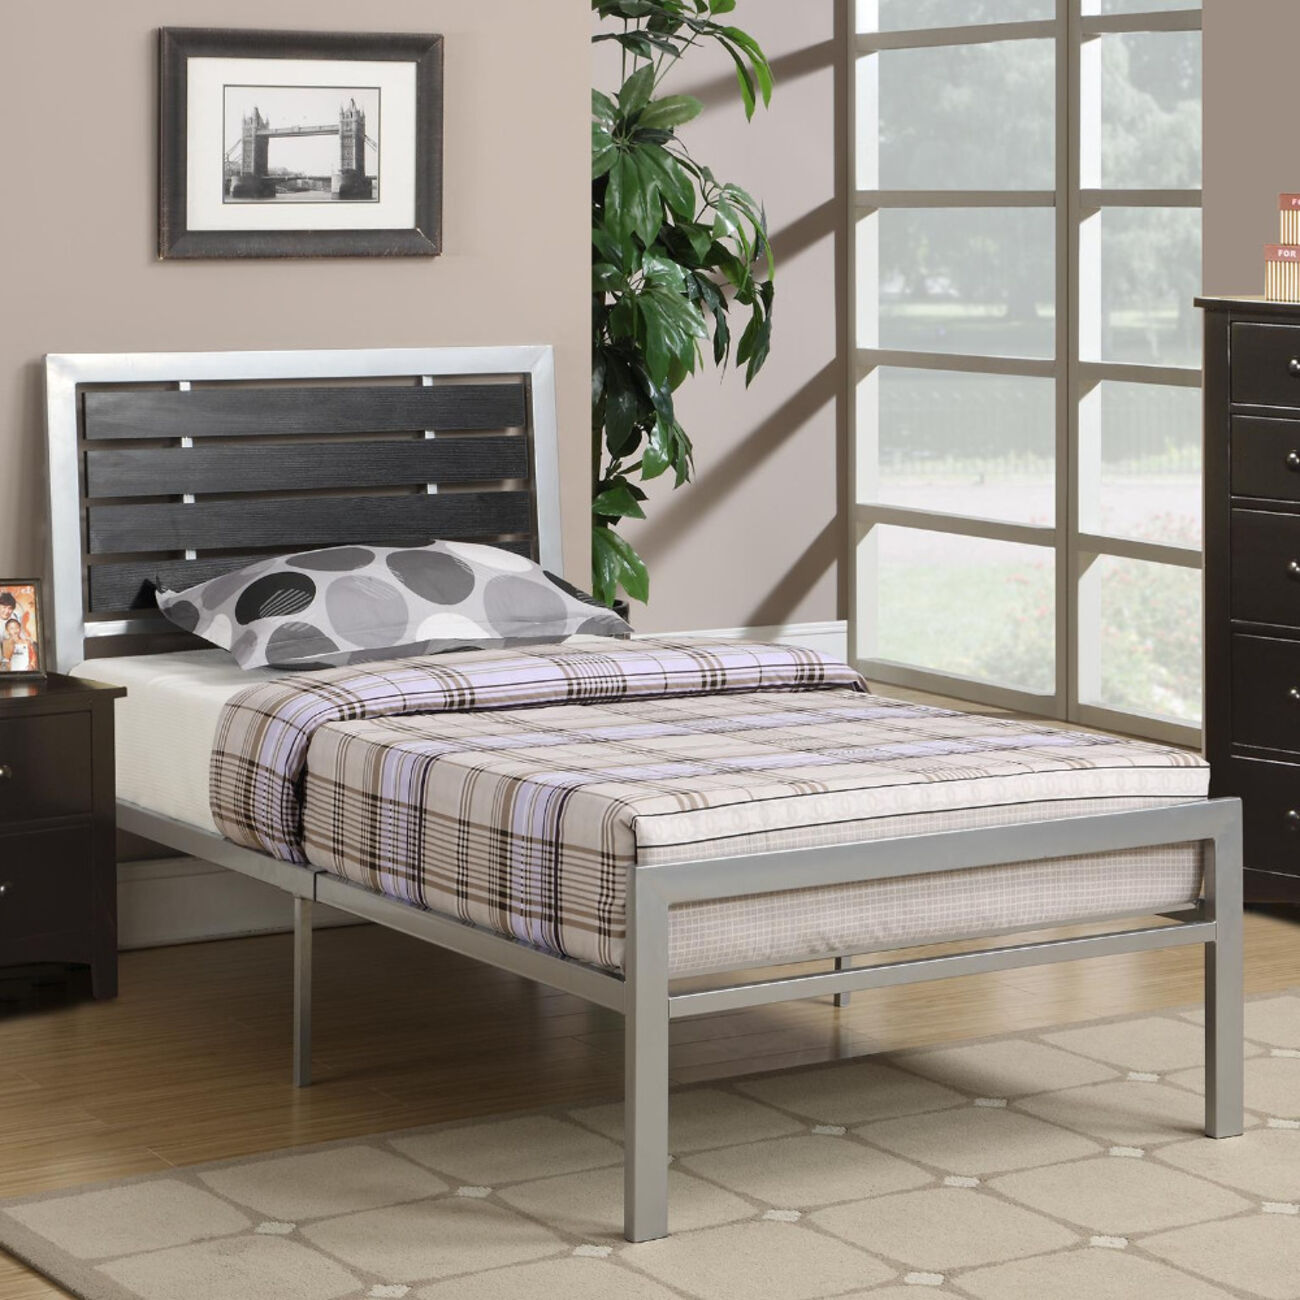 Wooden Full Bed With Black Wood Panel Headboard, Silver